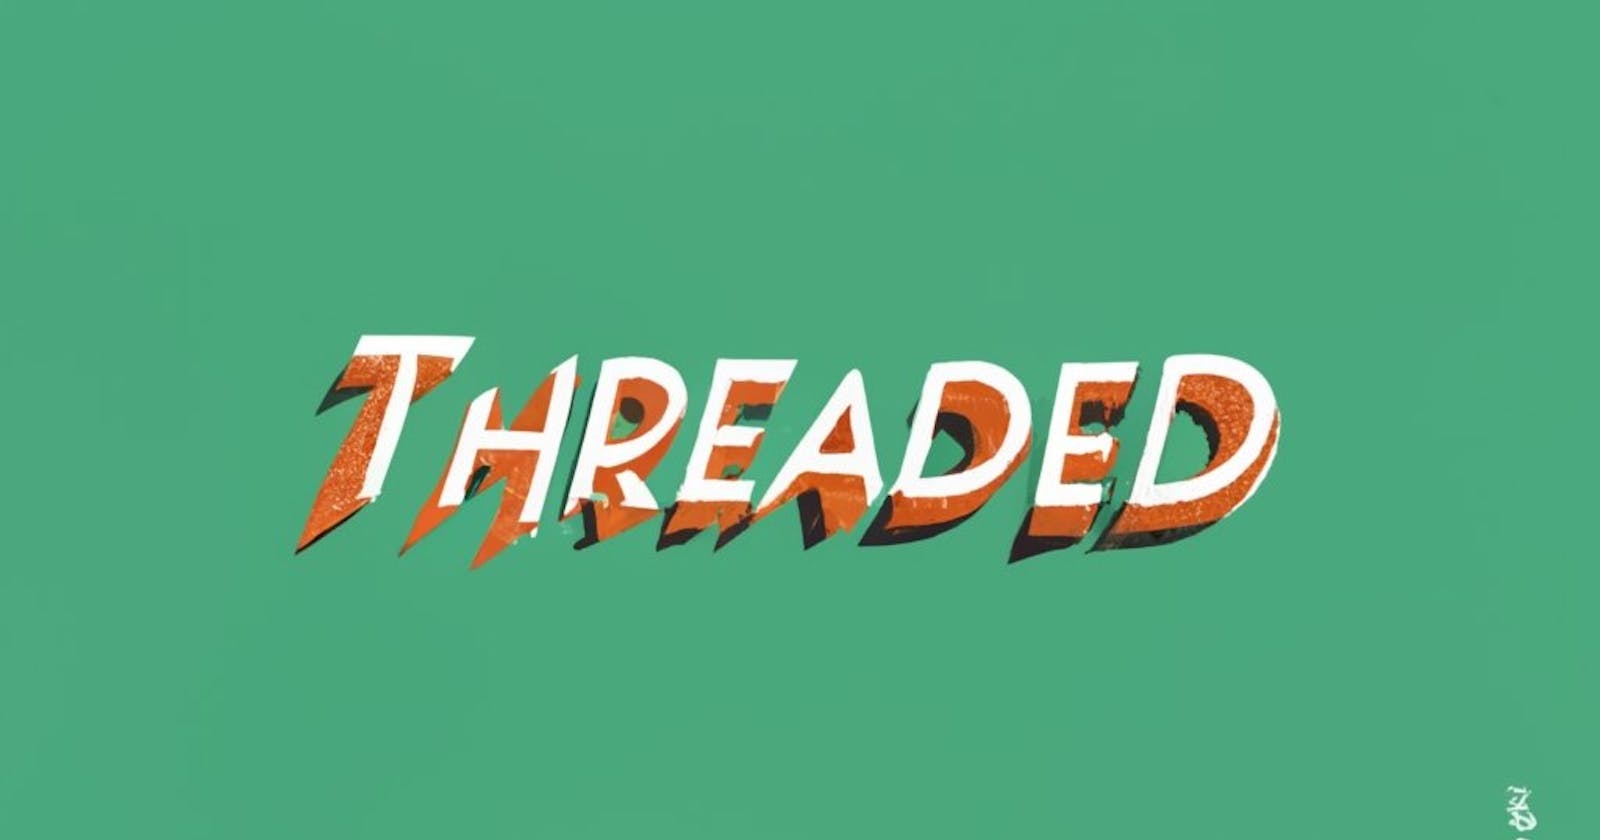 JavaScript is single-threaded, which means it has only one execution thread. How?